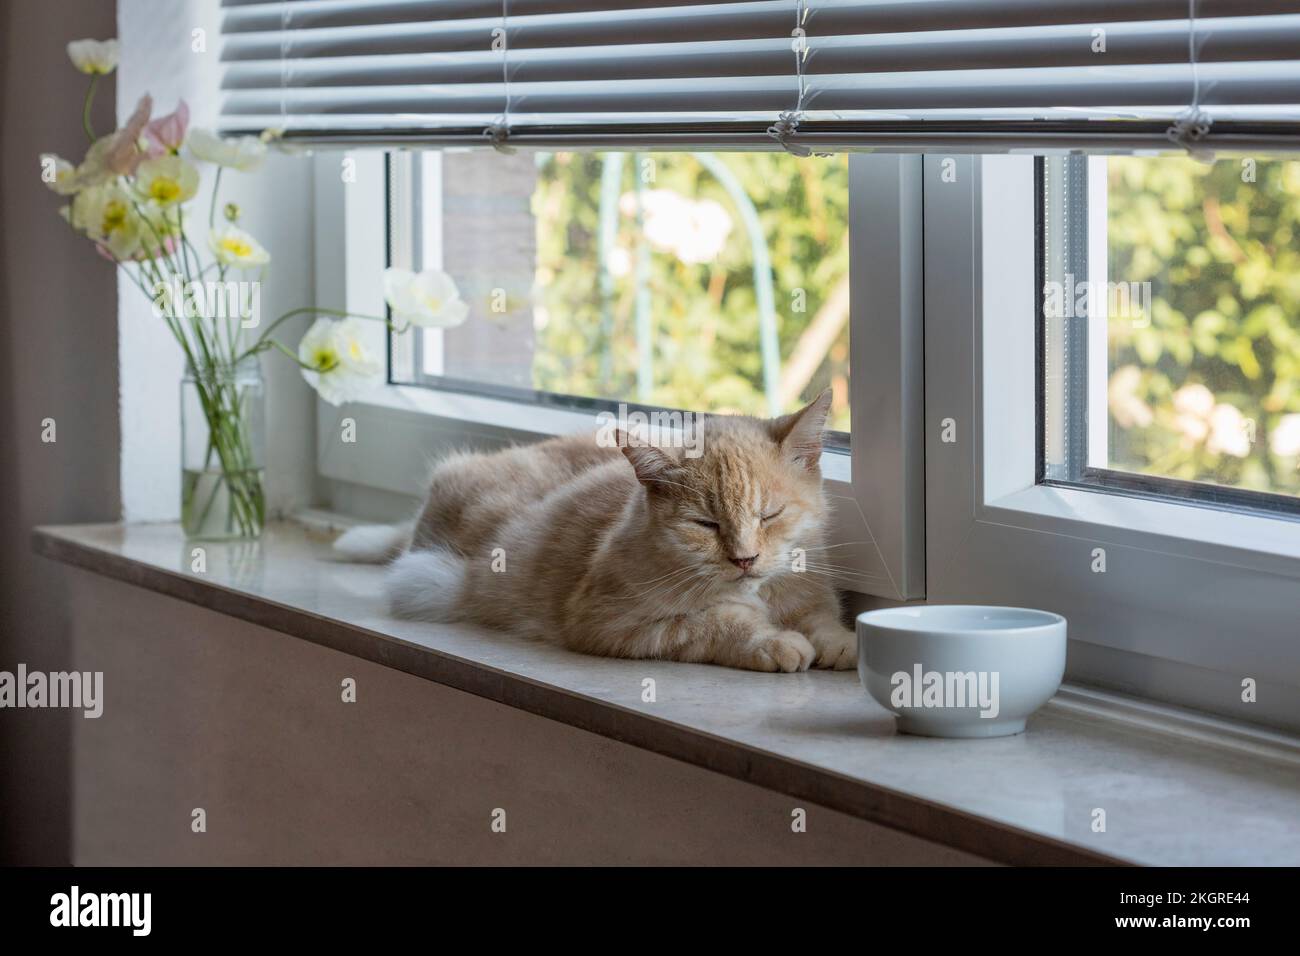 Cat sleeping on window sill Banque D'Images